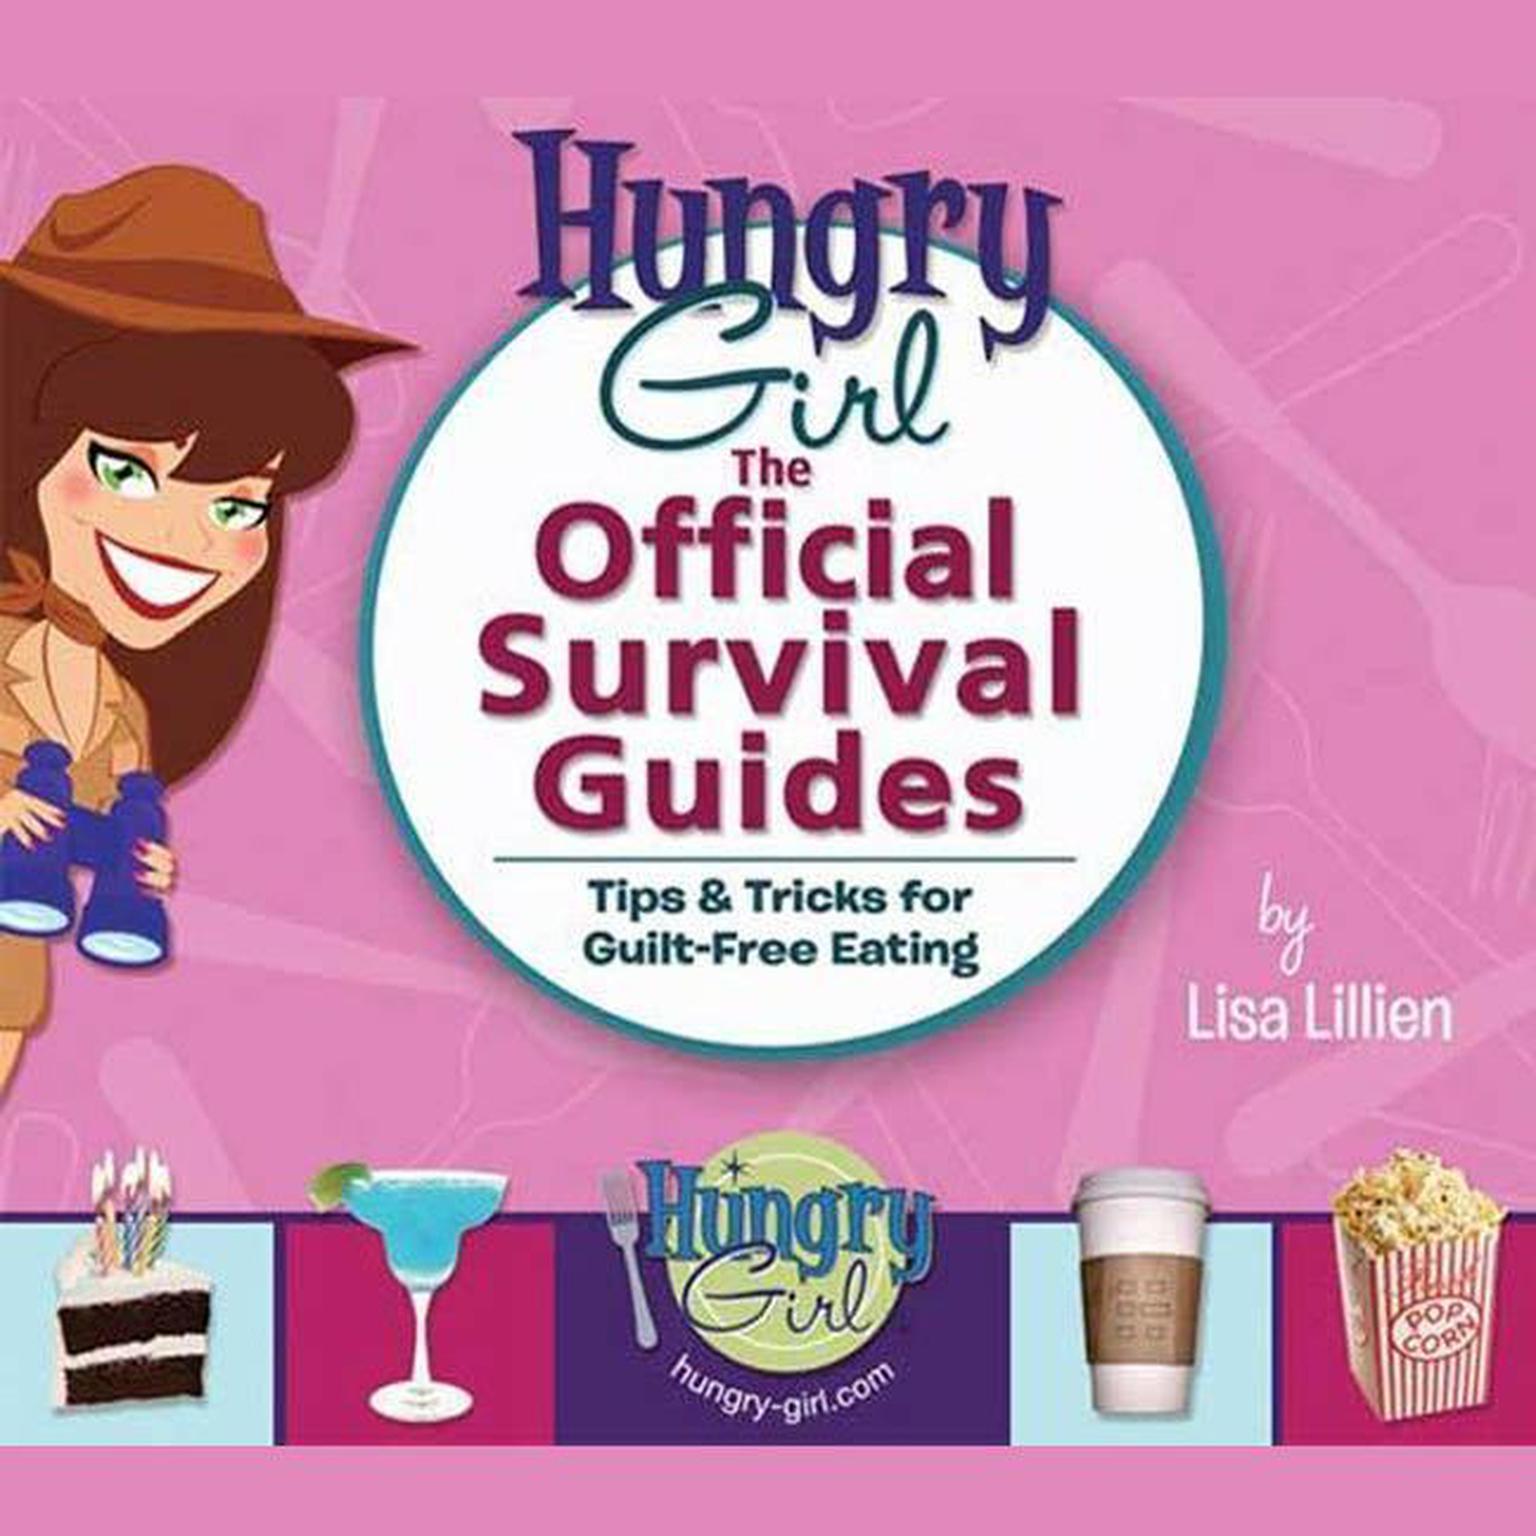 Hungry Girl: The Official Survival Guides: Tips & Treats for Guilt-Free Eating Audiobook, by Lisa Lillien